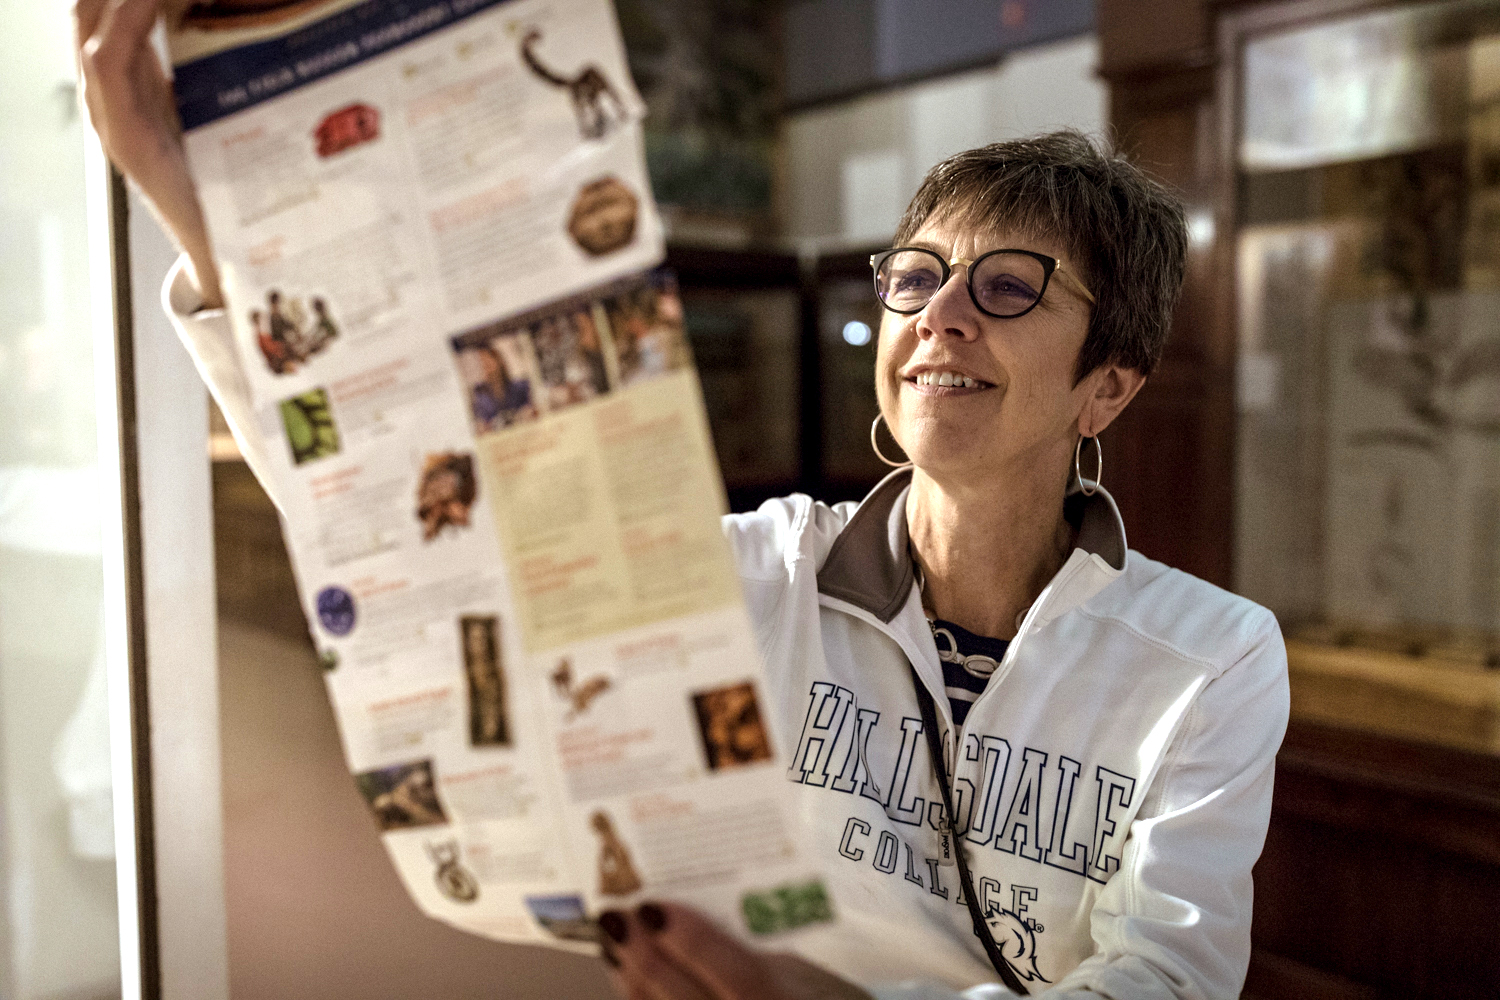 A woman wearing glasses reads a map that's she's unfolded in front of her.